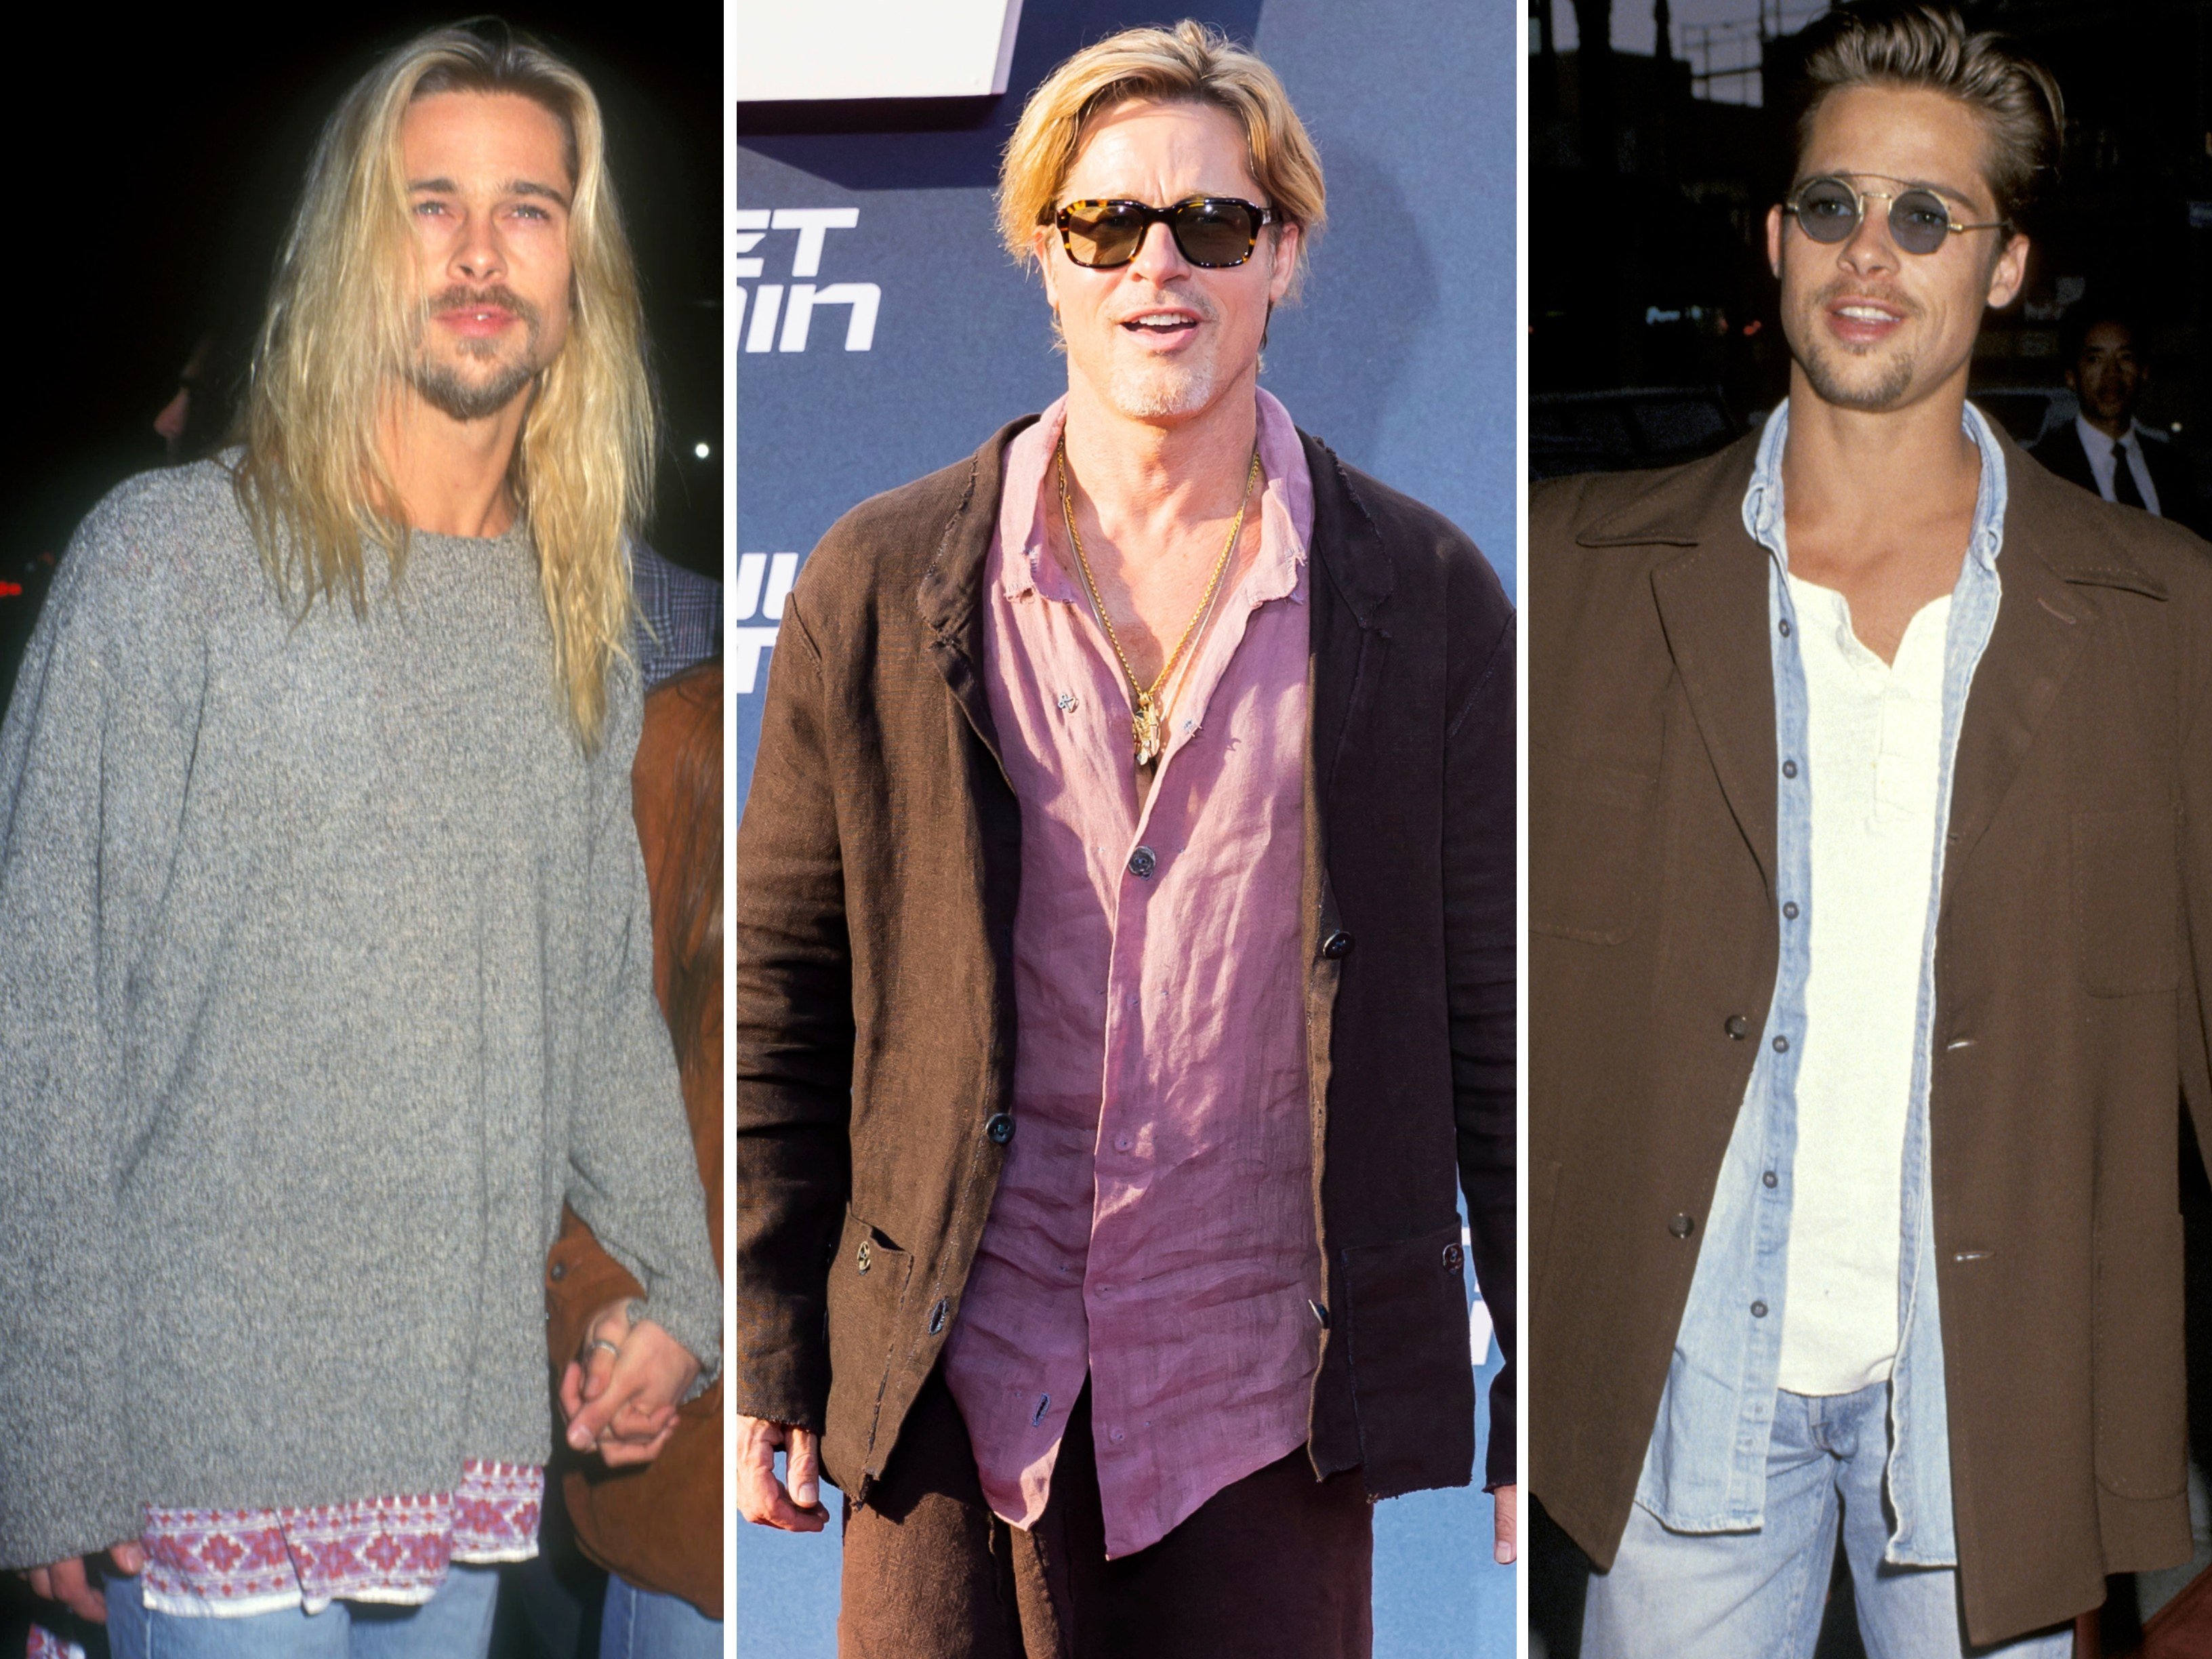 Hollywood A-lister Brad Pitt has evolved his style from laid-back to sophisticated over the decades. Photo: Getty Images